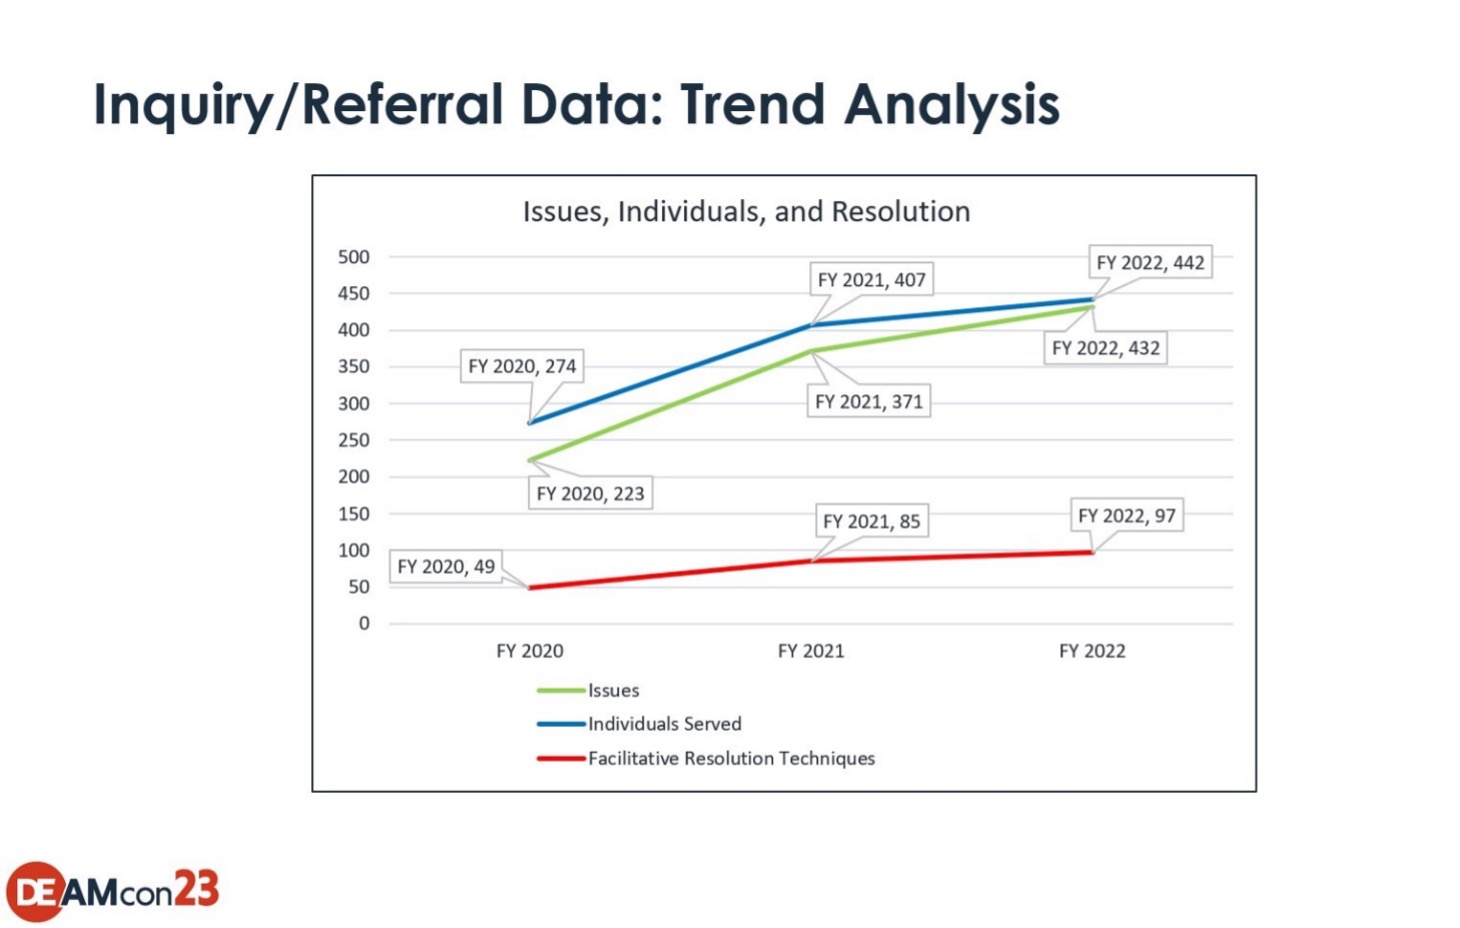 Inquiry/Referral Data: Trend Analysis - Issues, Individuals, & Resolution